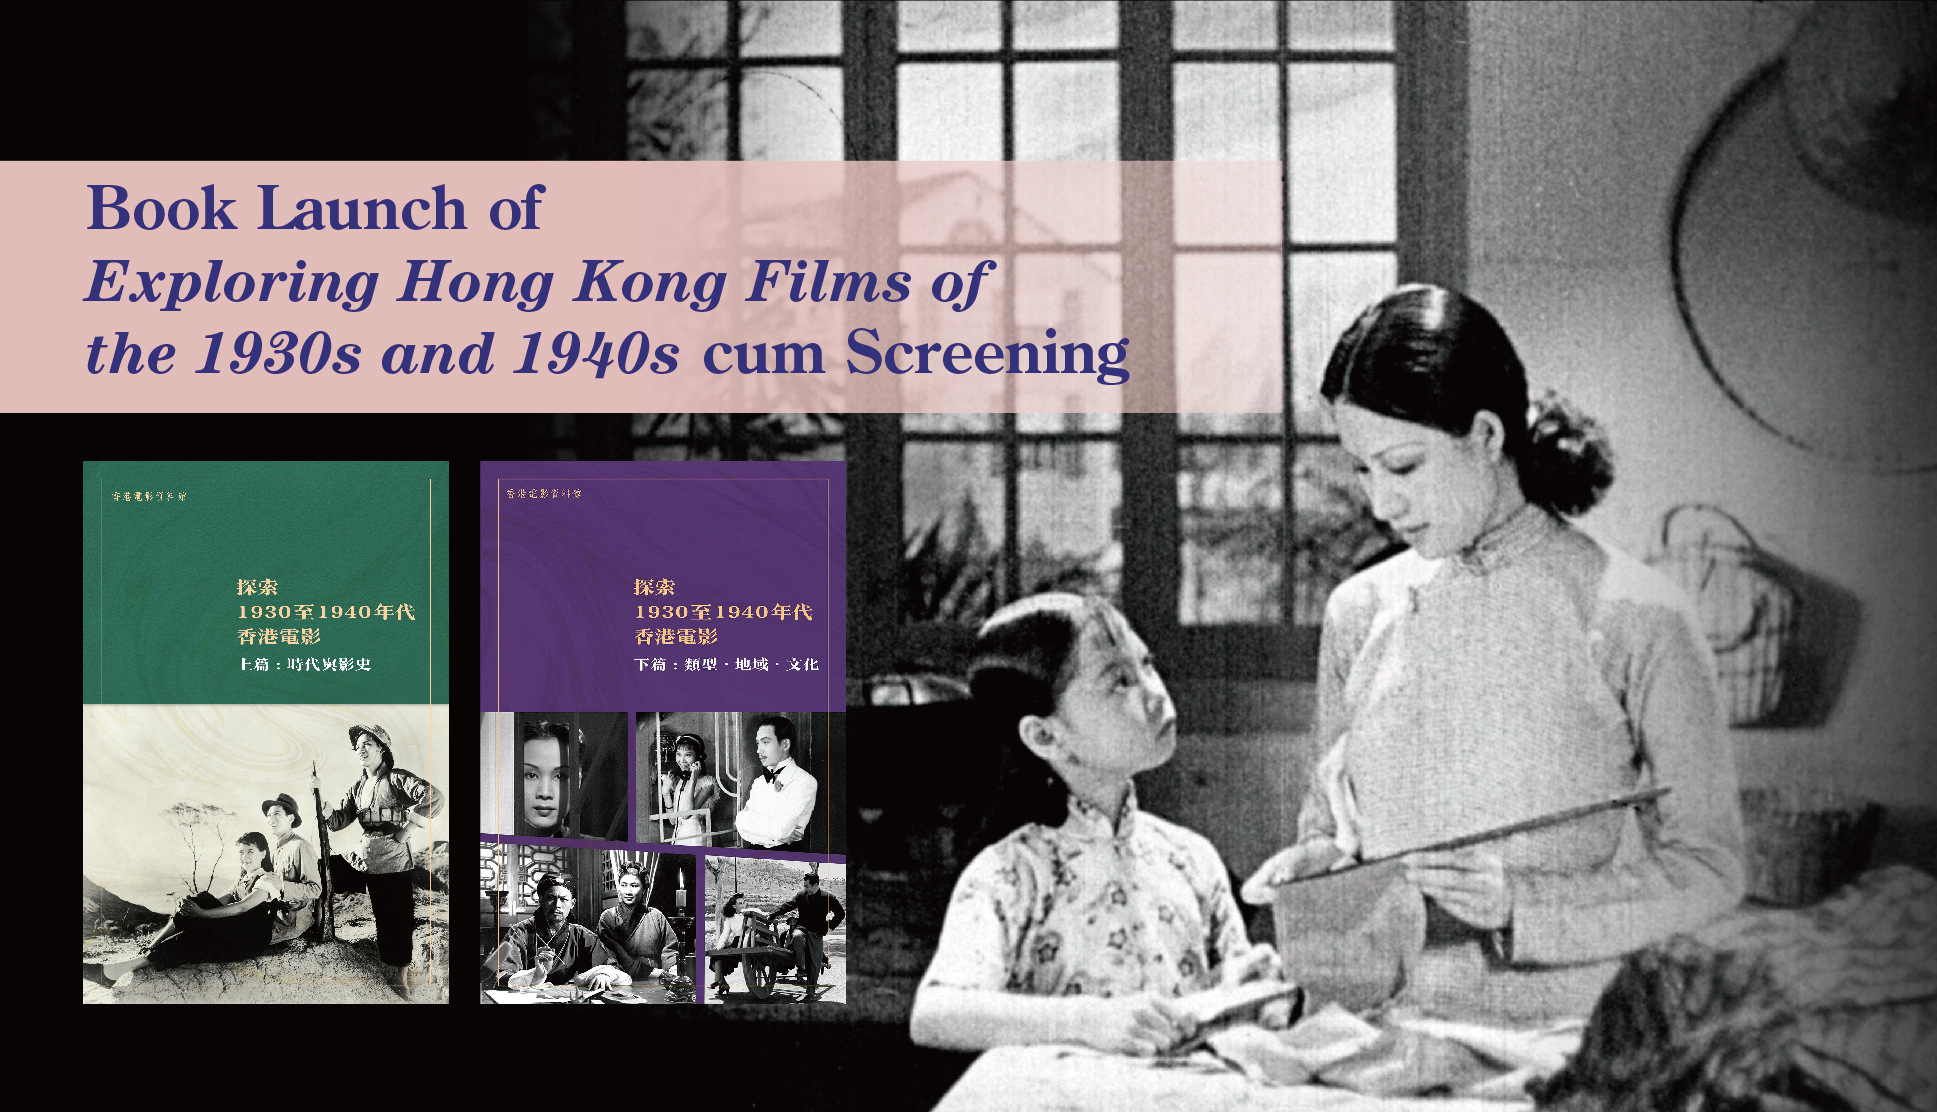 Book Launch of Exploring Hong Kong Films of the 1930s and 1940s cum Screening